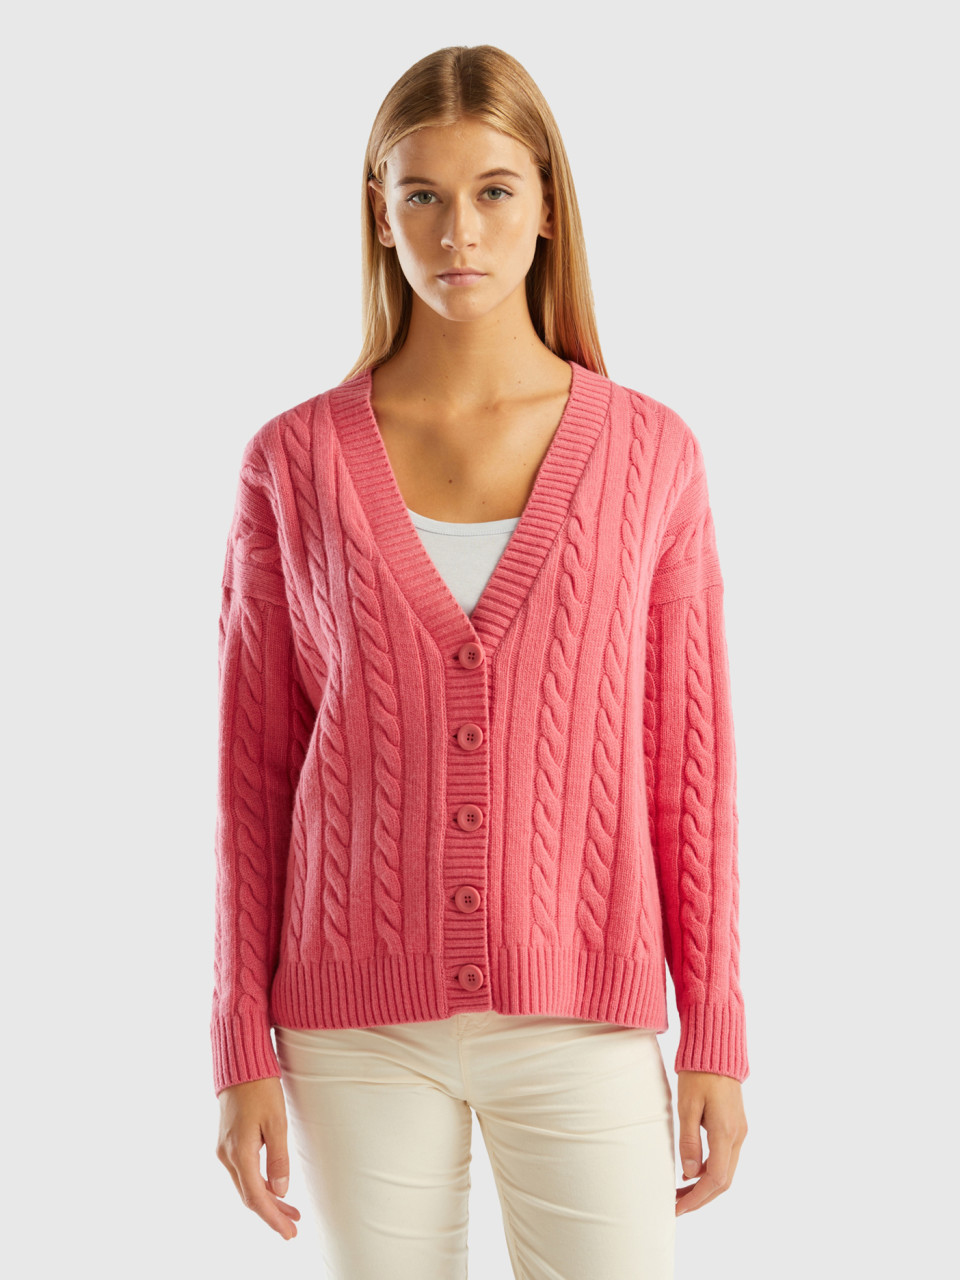 Benetton, Oversized Fit Cardigan With Cables, Pink, Women